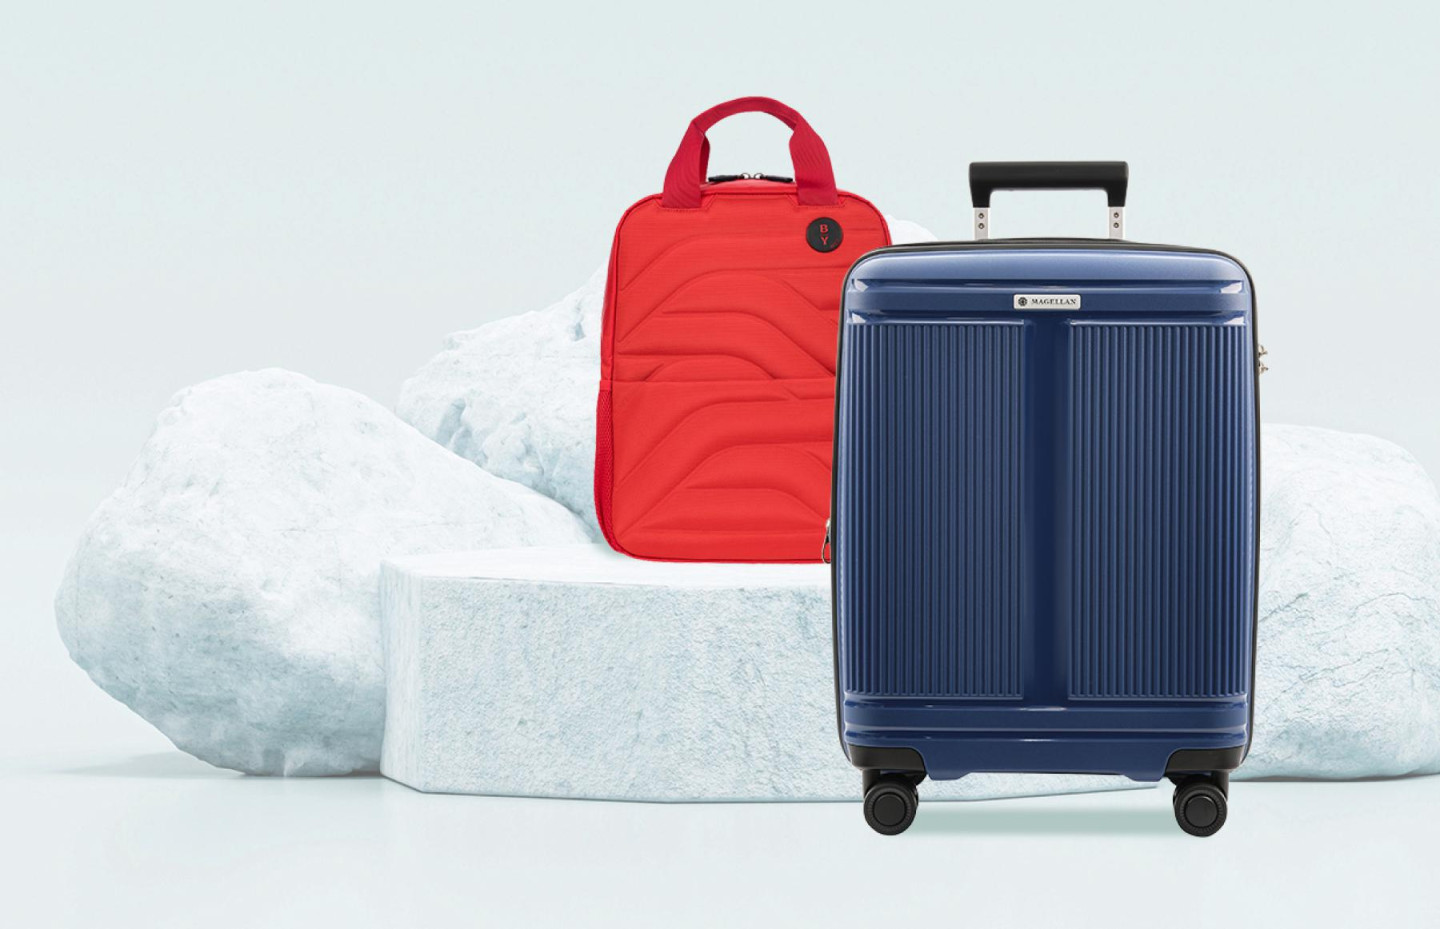 ChemodanPRO stores began exchanging old suitcases for discounts